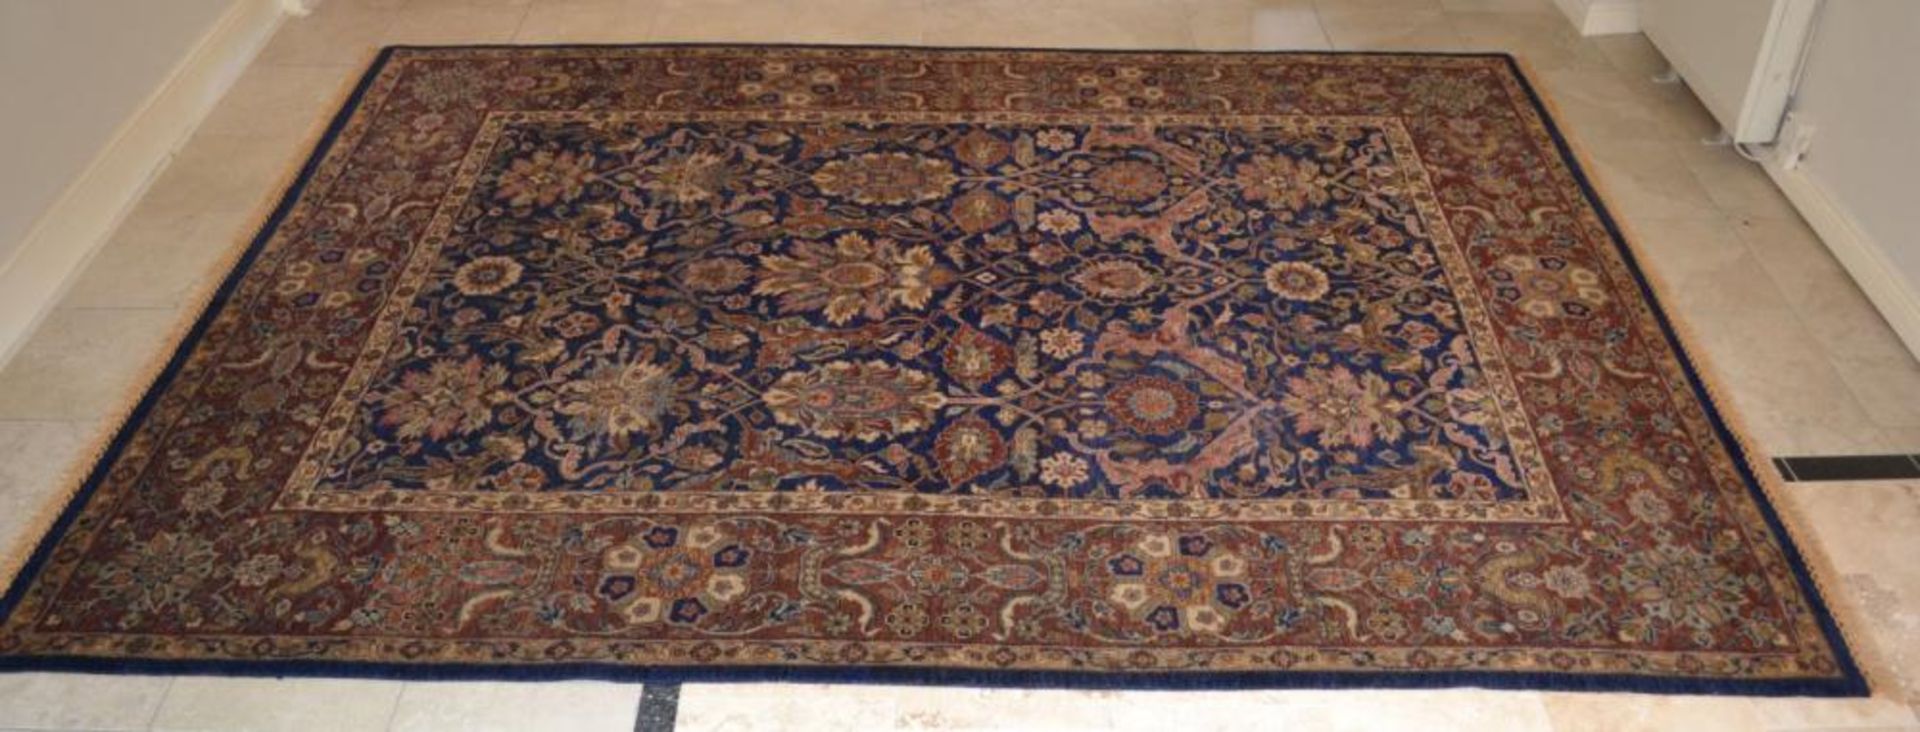 1 x Fine Indian Vegetable Dyed Handmade Carpet in Navy and Rust - All Wool With Cotton Foundation - - Image 7 of 22